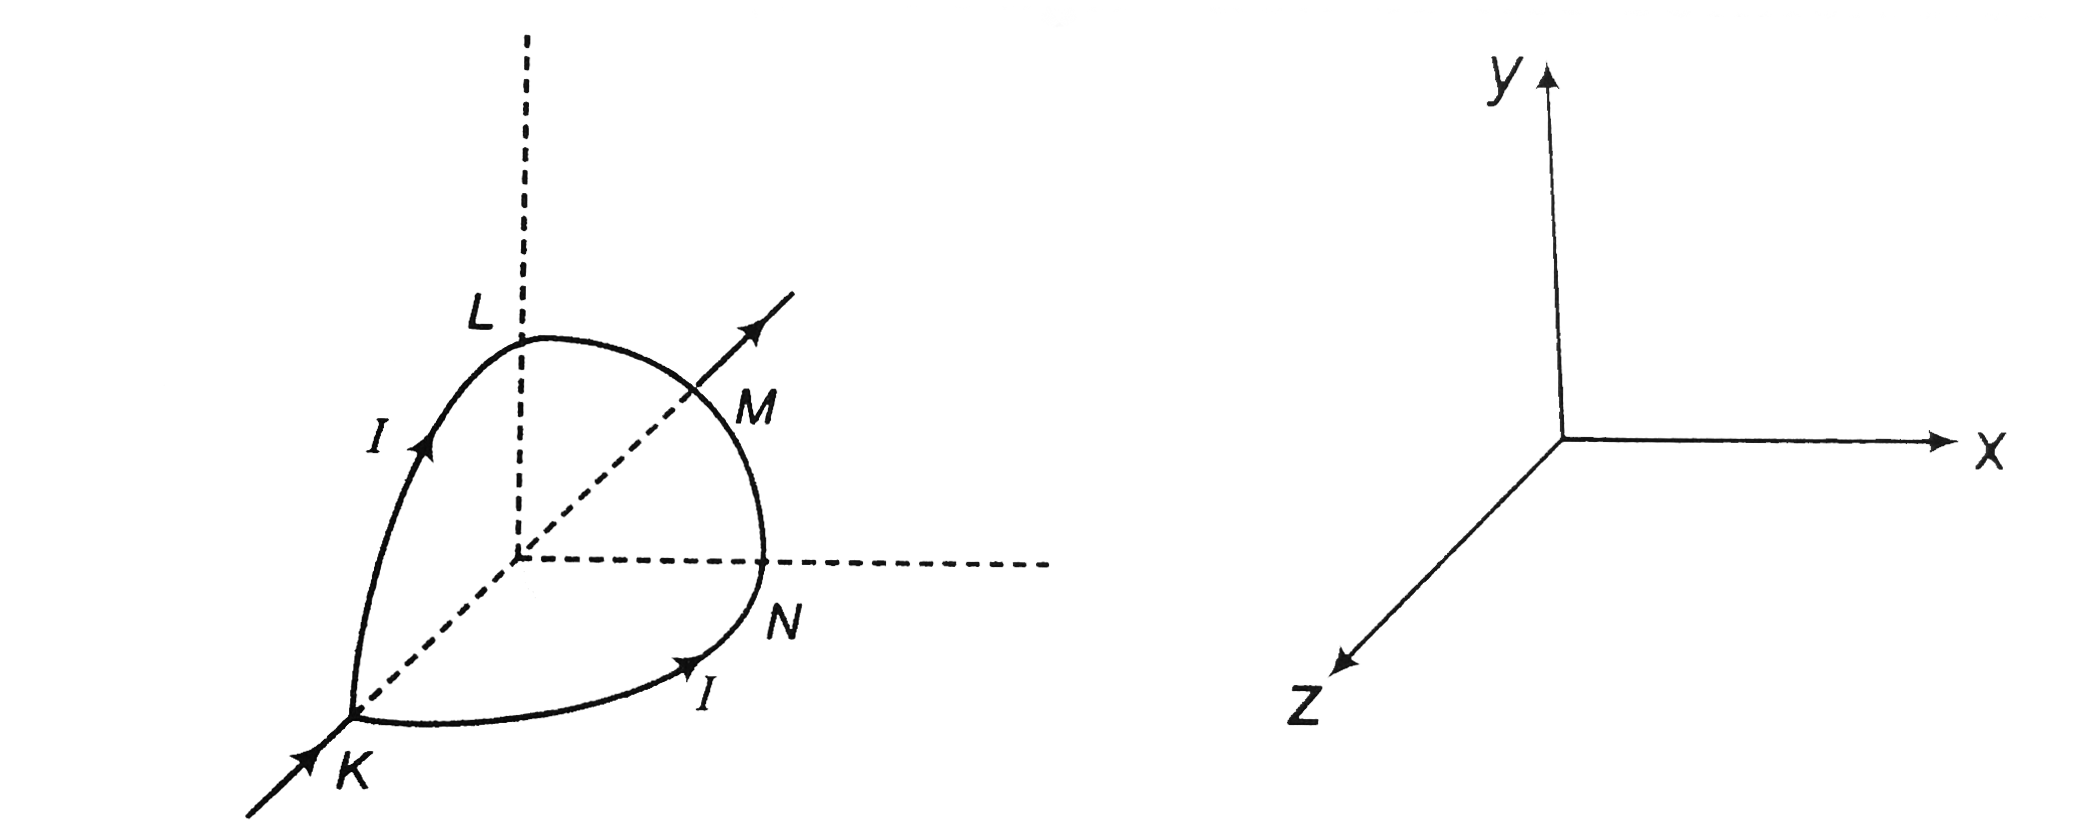 A circular loop of radius R is bent along a diameter and given a shape as shown in figure. One of 30, A   the se micircles (KNM) lies in the xz-plane and the other one (KLM) in the yz-plane with their centres at origin. Current I is flowing through each of the semicircles as shown in figure.      (a) A particle of charge q is released at the origin with a velocity v =- v0hati. Find the instantaneous force F on the particle. Assume that space is gravity free.  (b) If an external uniform magnetic field B0hatj is applied, determine the force F1 and F2 on the semicircles KLM and KNM due to the field and the net force F on the loop.